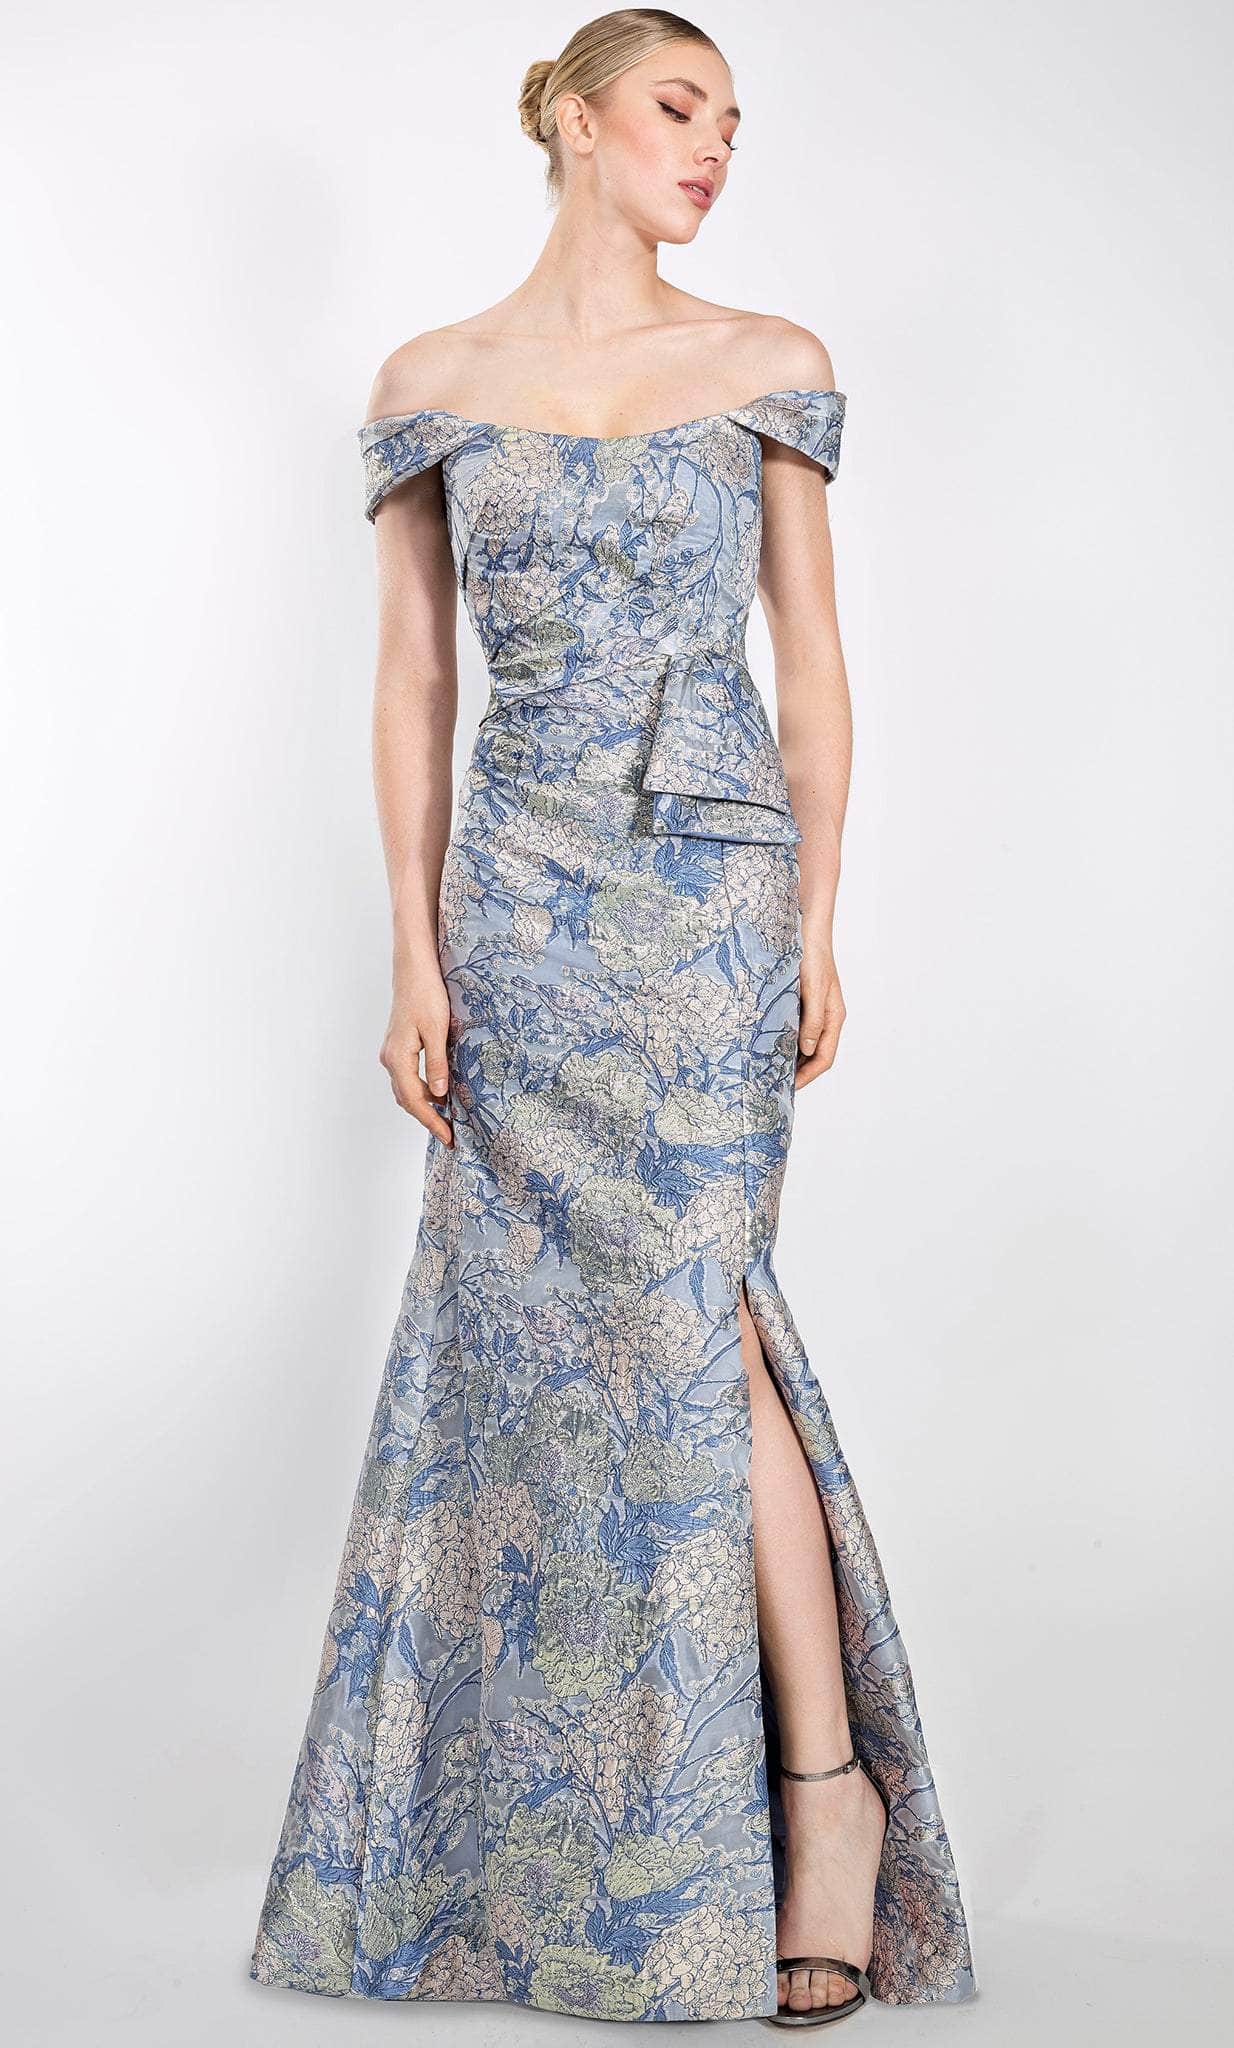 Image of Janique 920 - Bow Ornate Floral Evening Gown